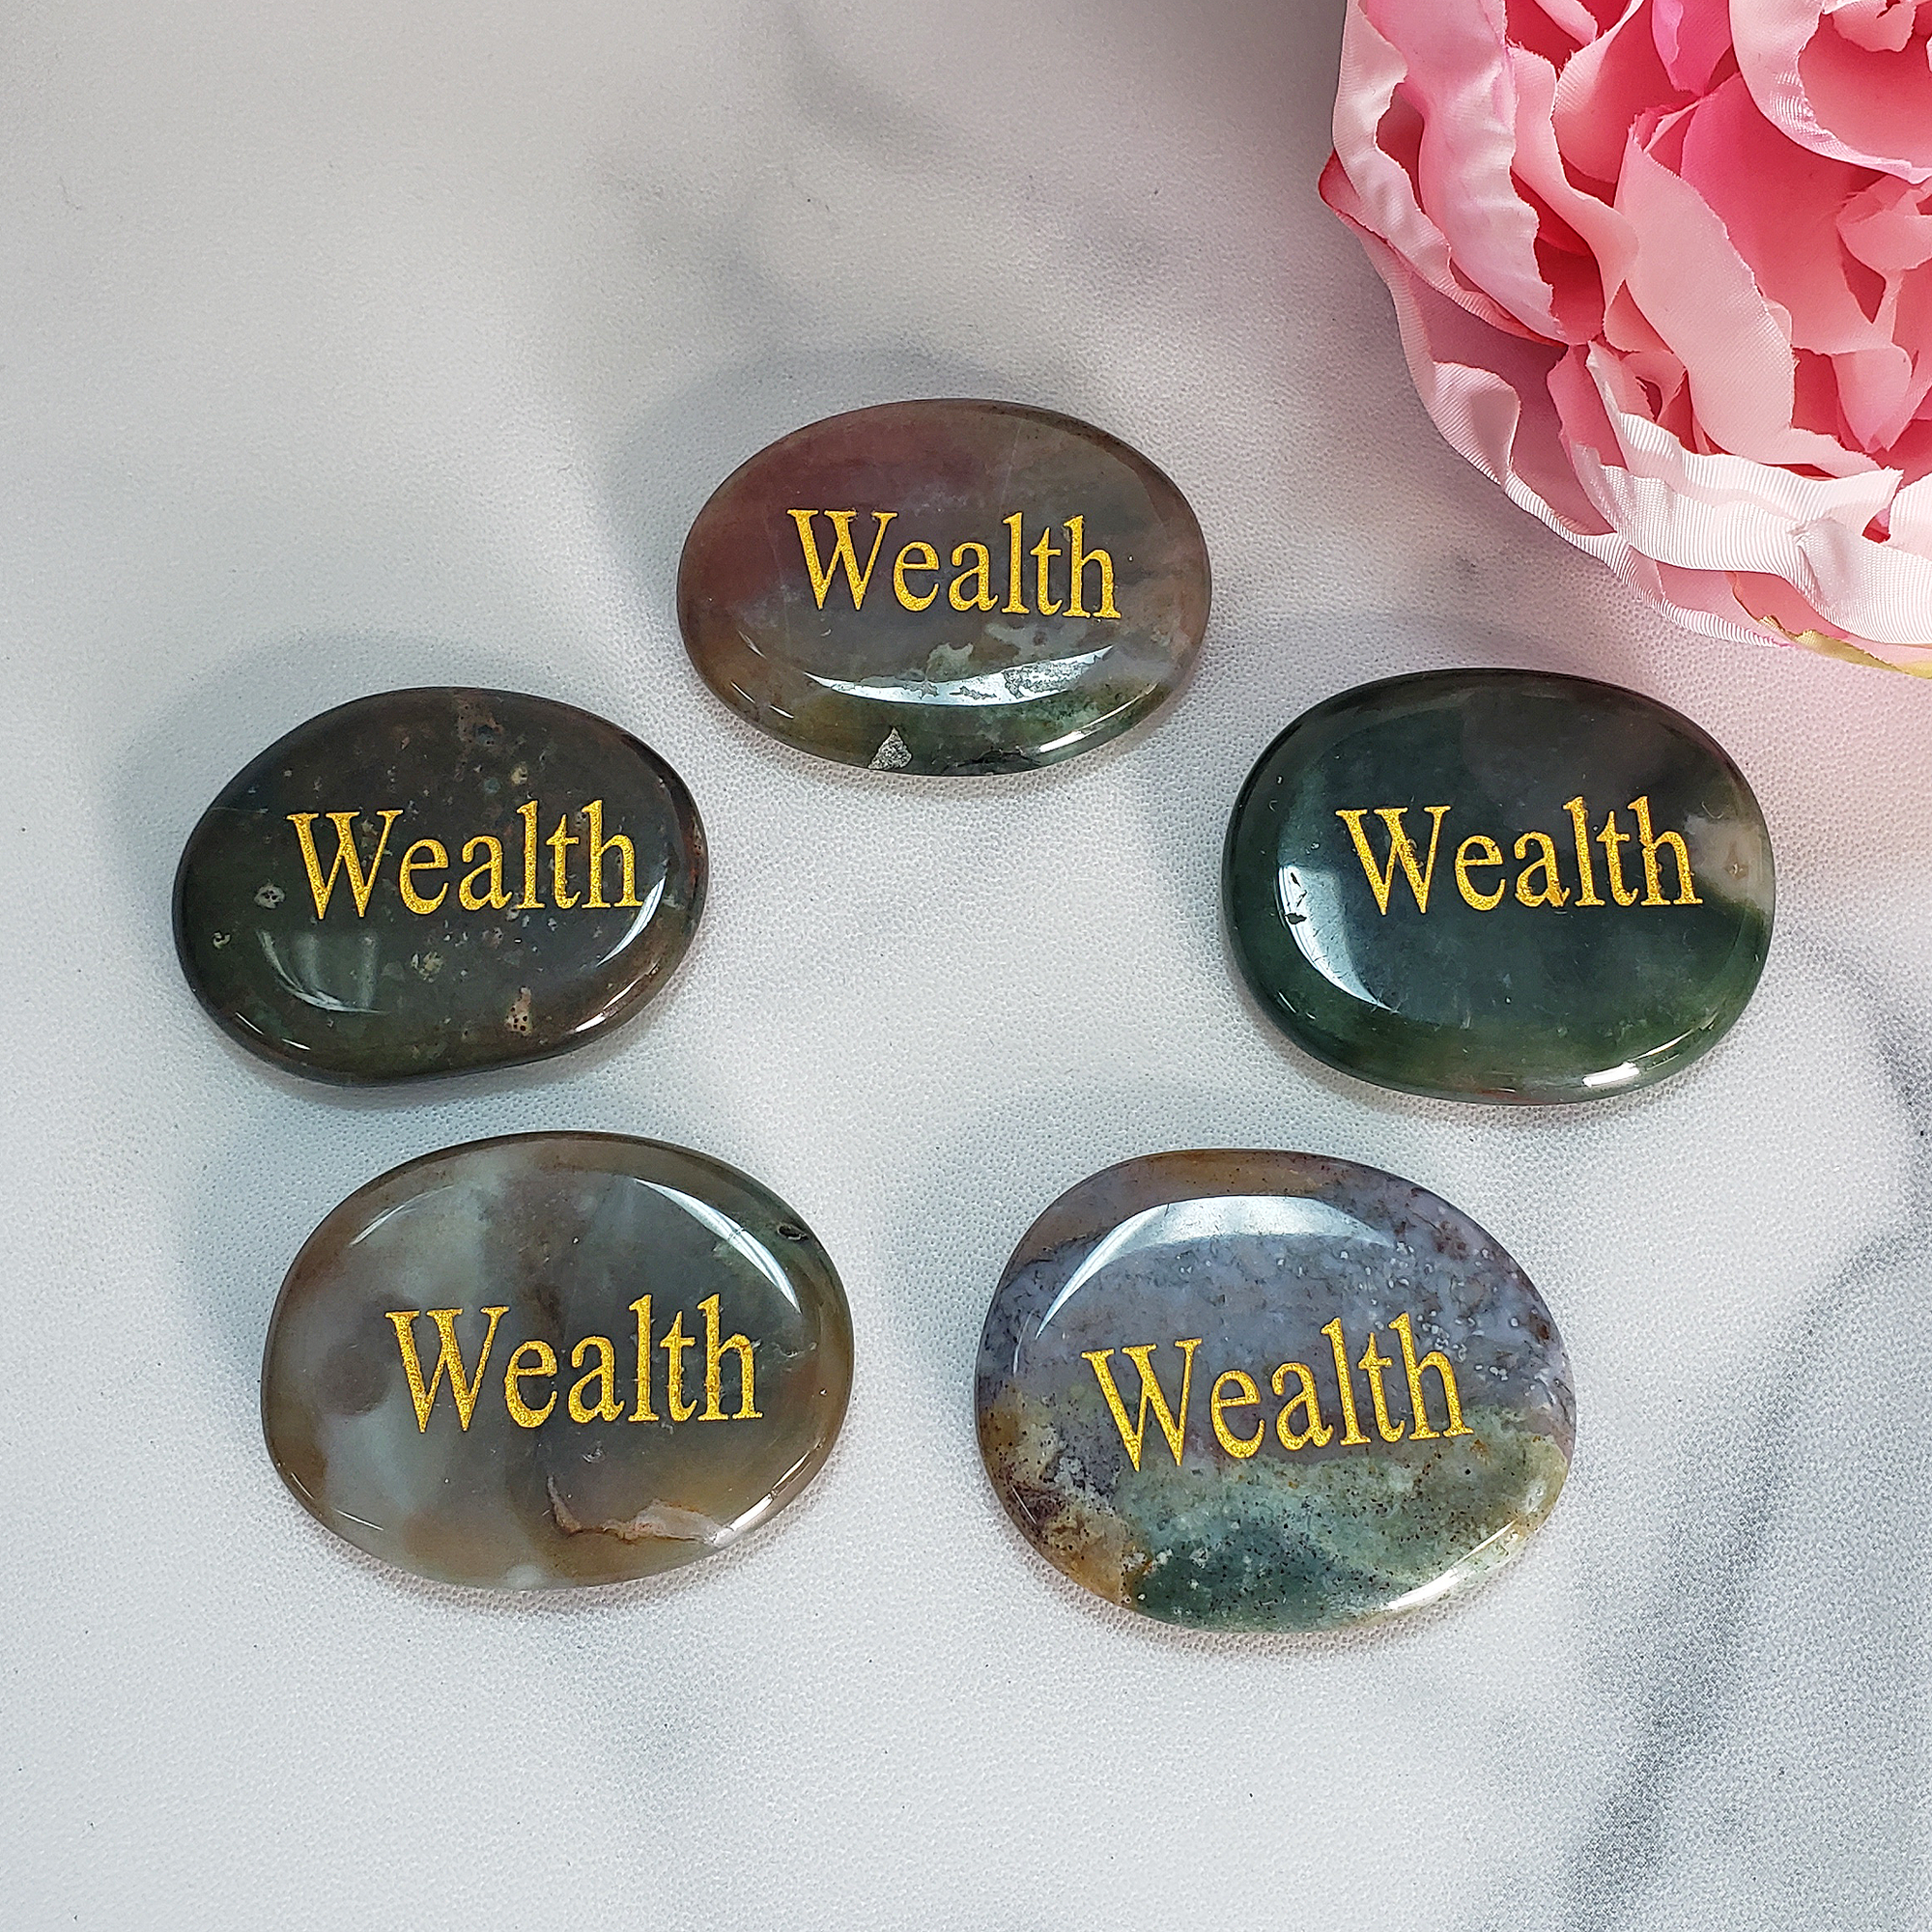 Wealth Affirmation Palm Stone | Crystal Worry Stone with "Wealth" Engraving